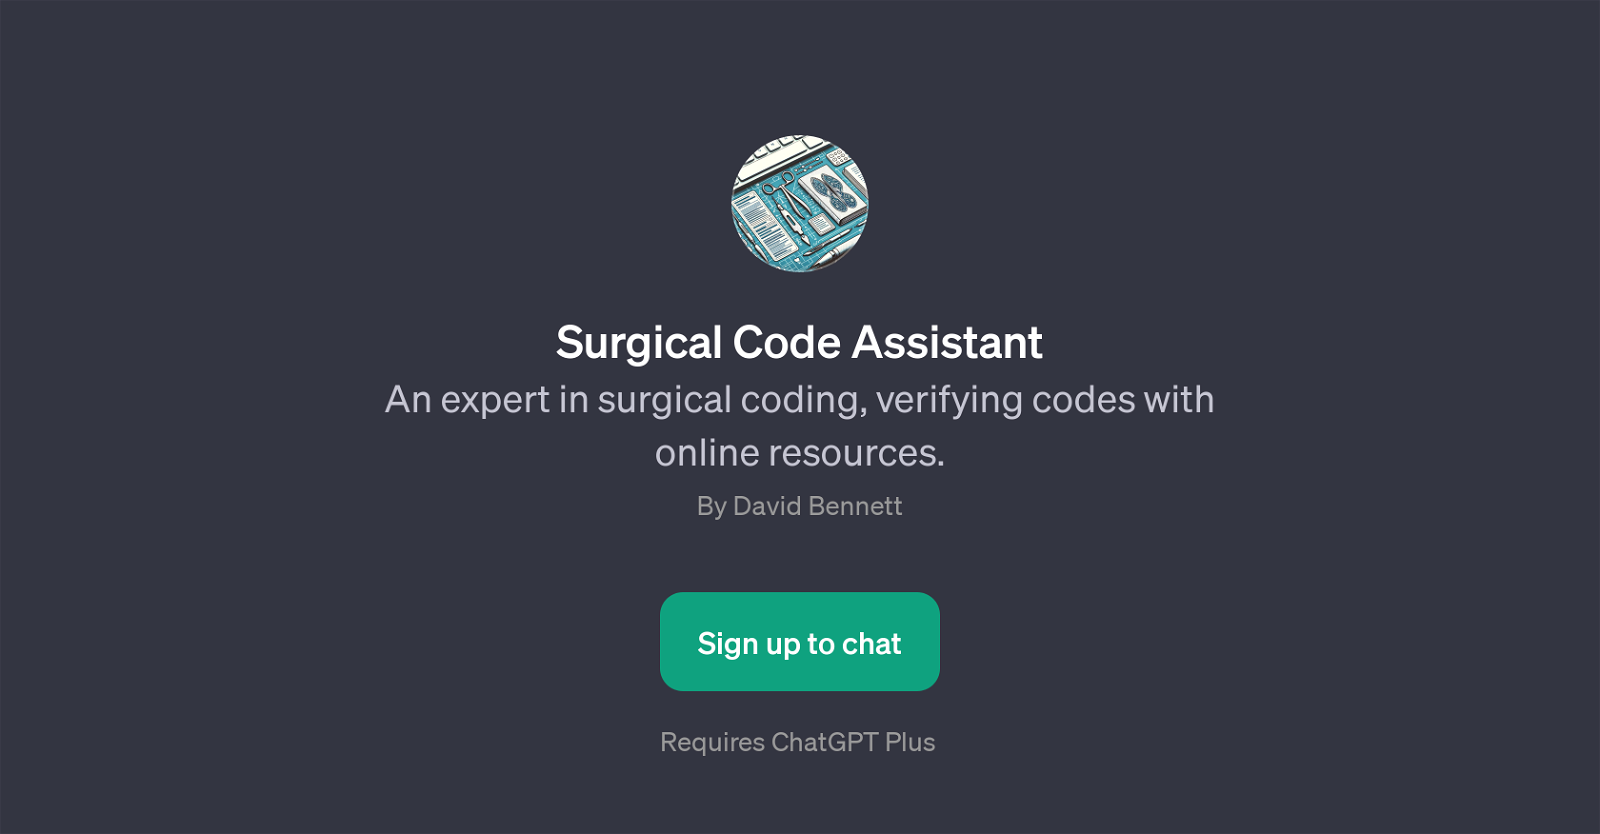 Surgical Code Assistant website